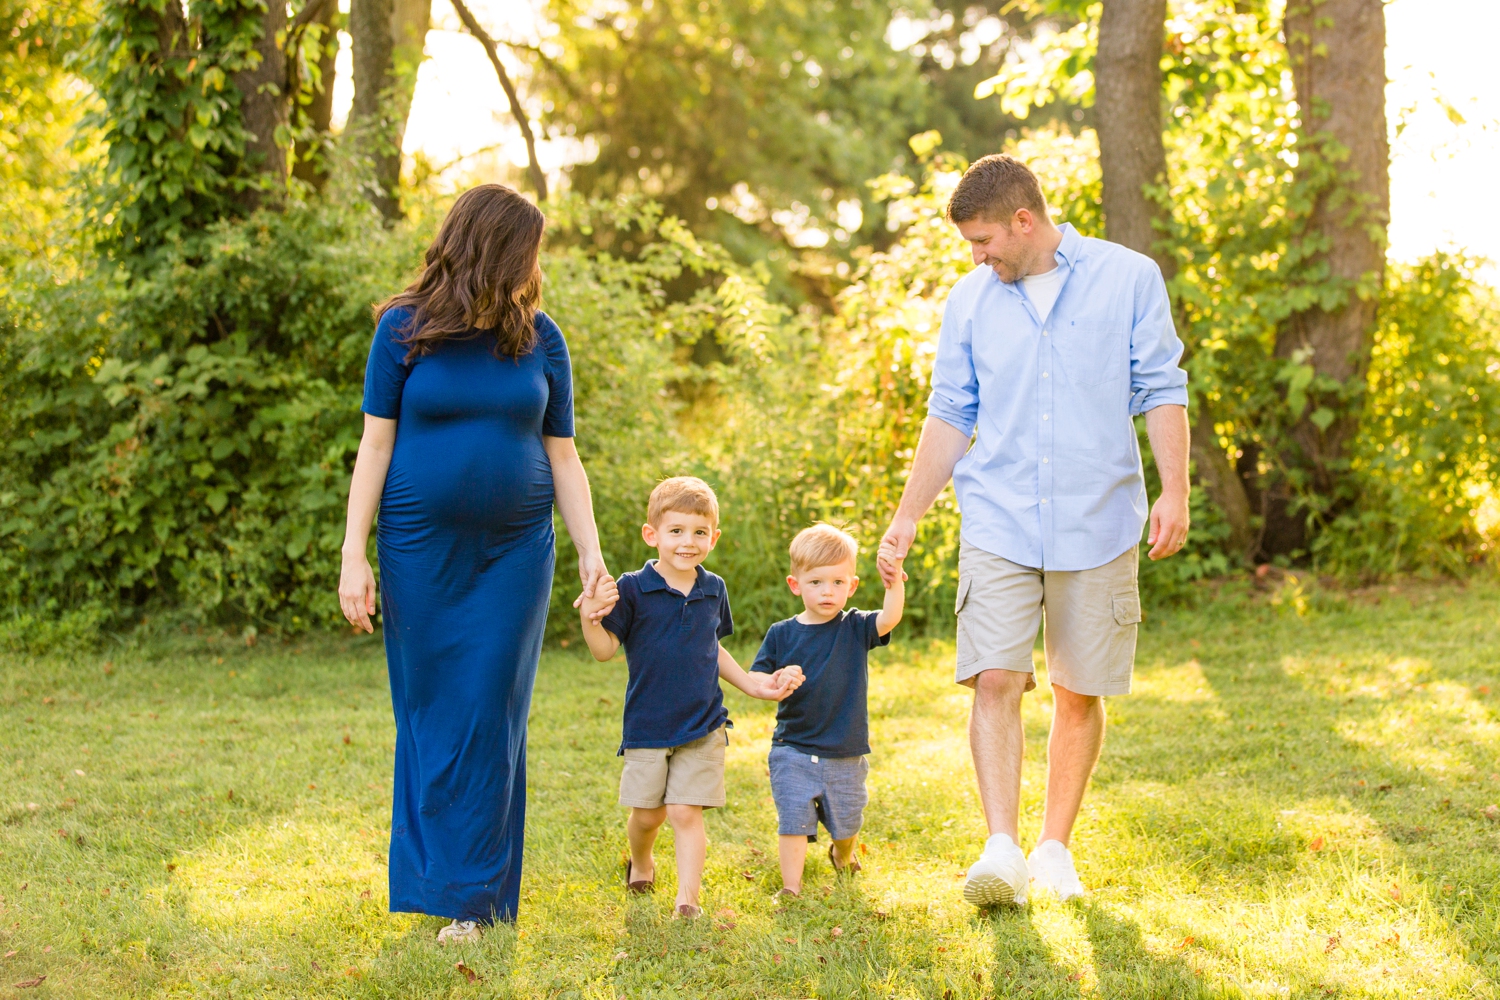 moraine state park family photos, pittsburgh family photographer, family photo outfit ideas, pittsburgh maternity photographer